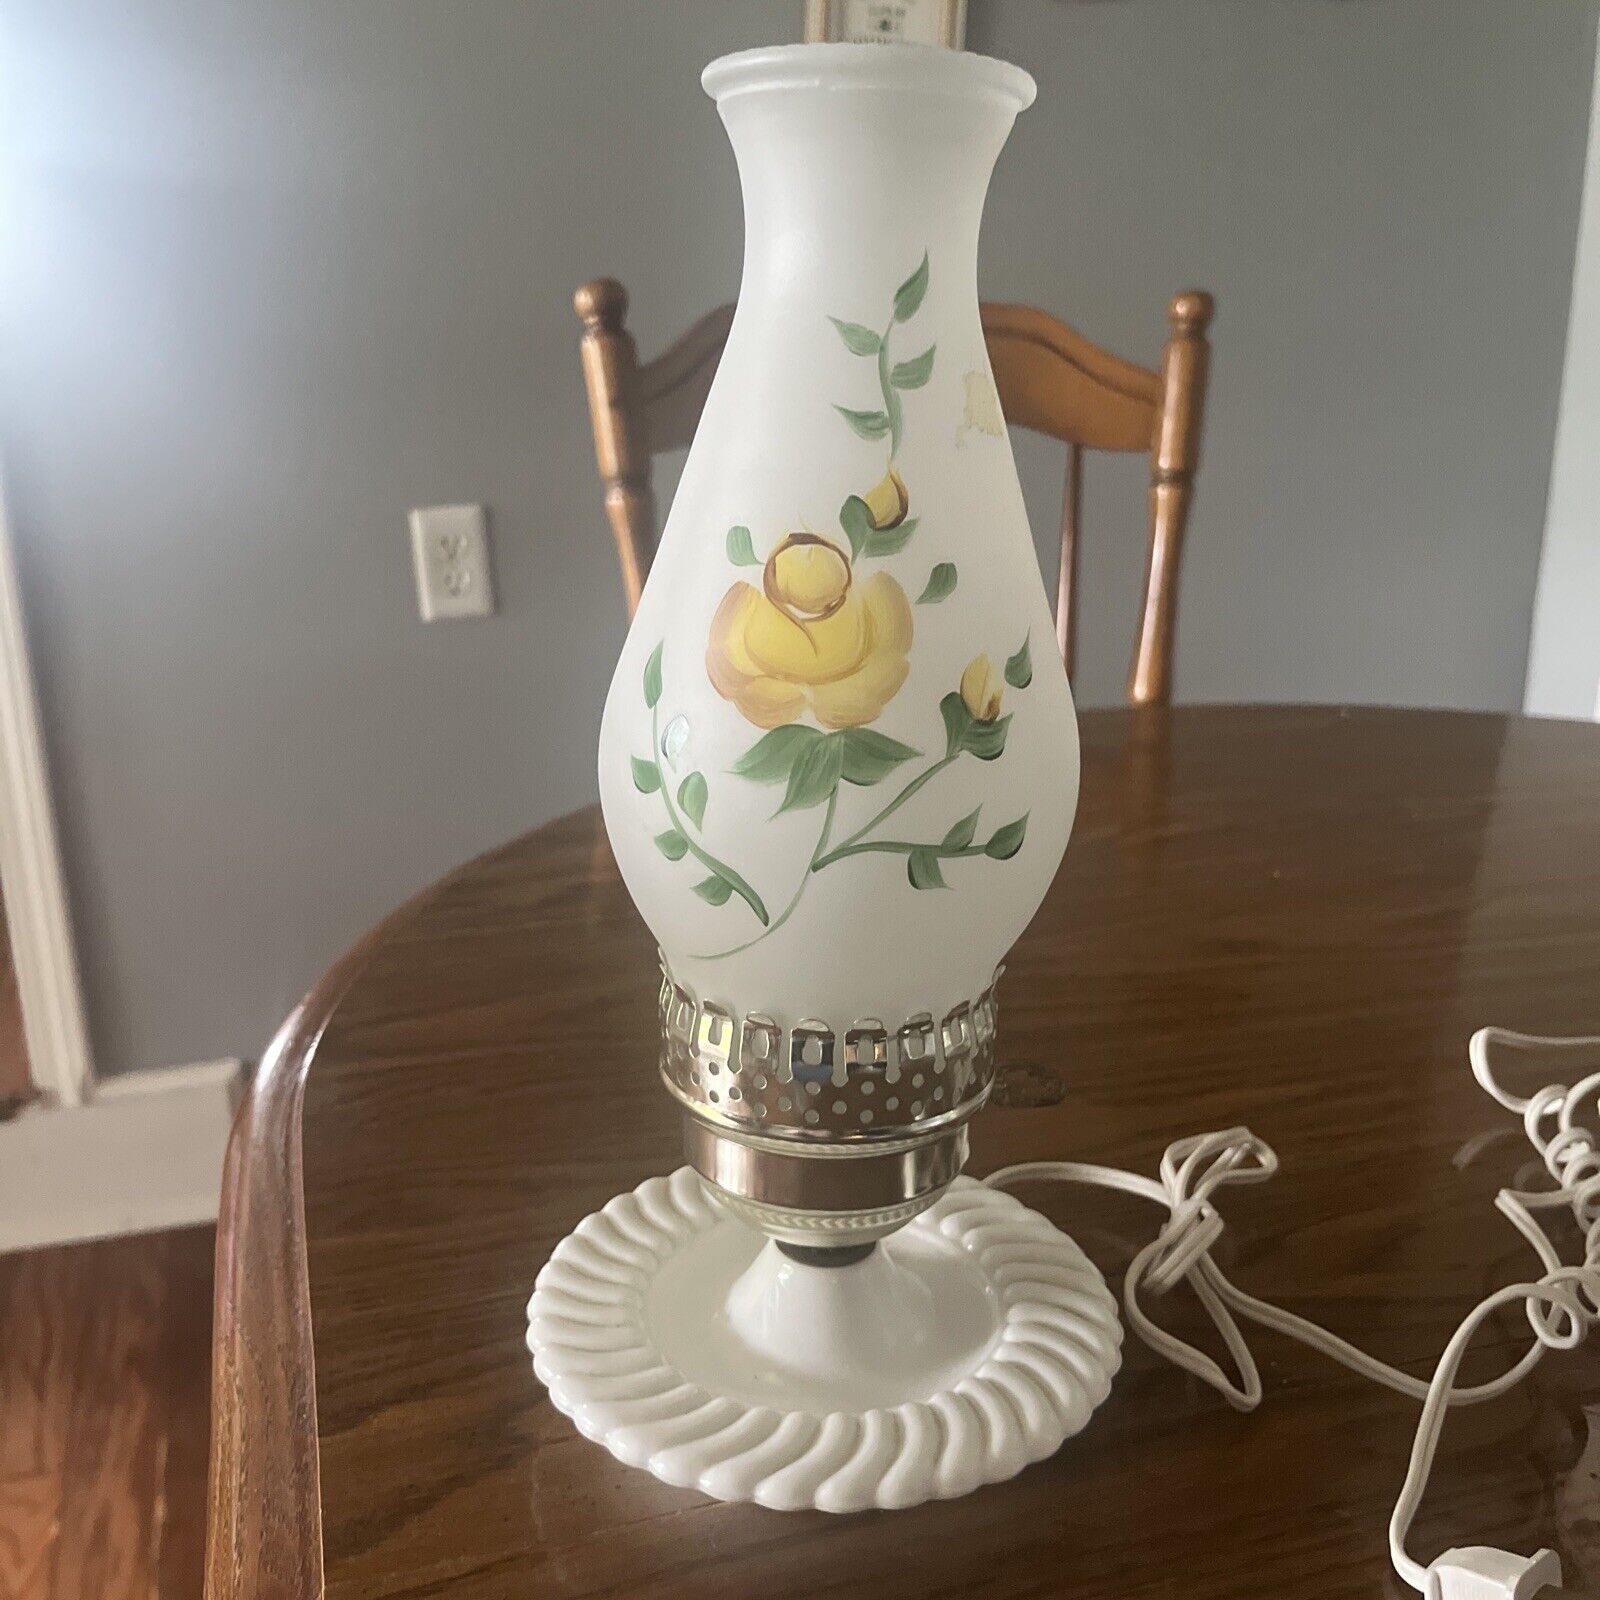 Vintage Milk Glass Hand Painted Coral Roses Electric Hurricane Lamp (tested)